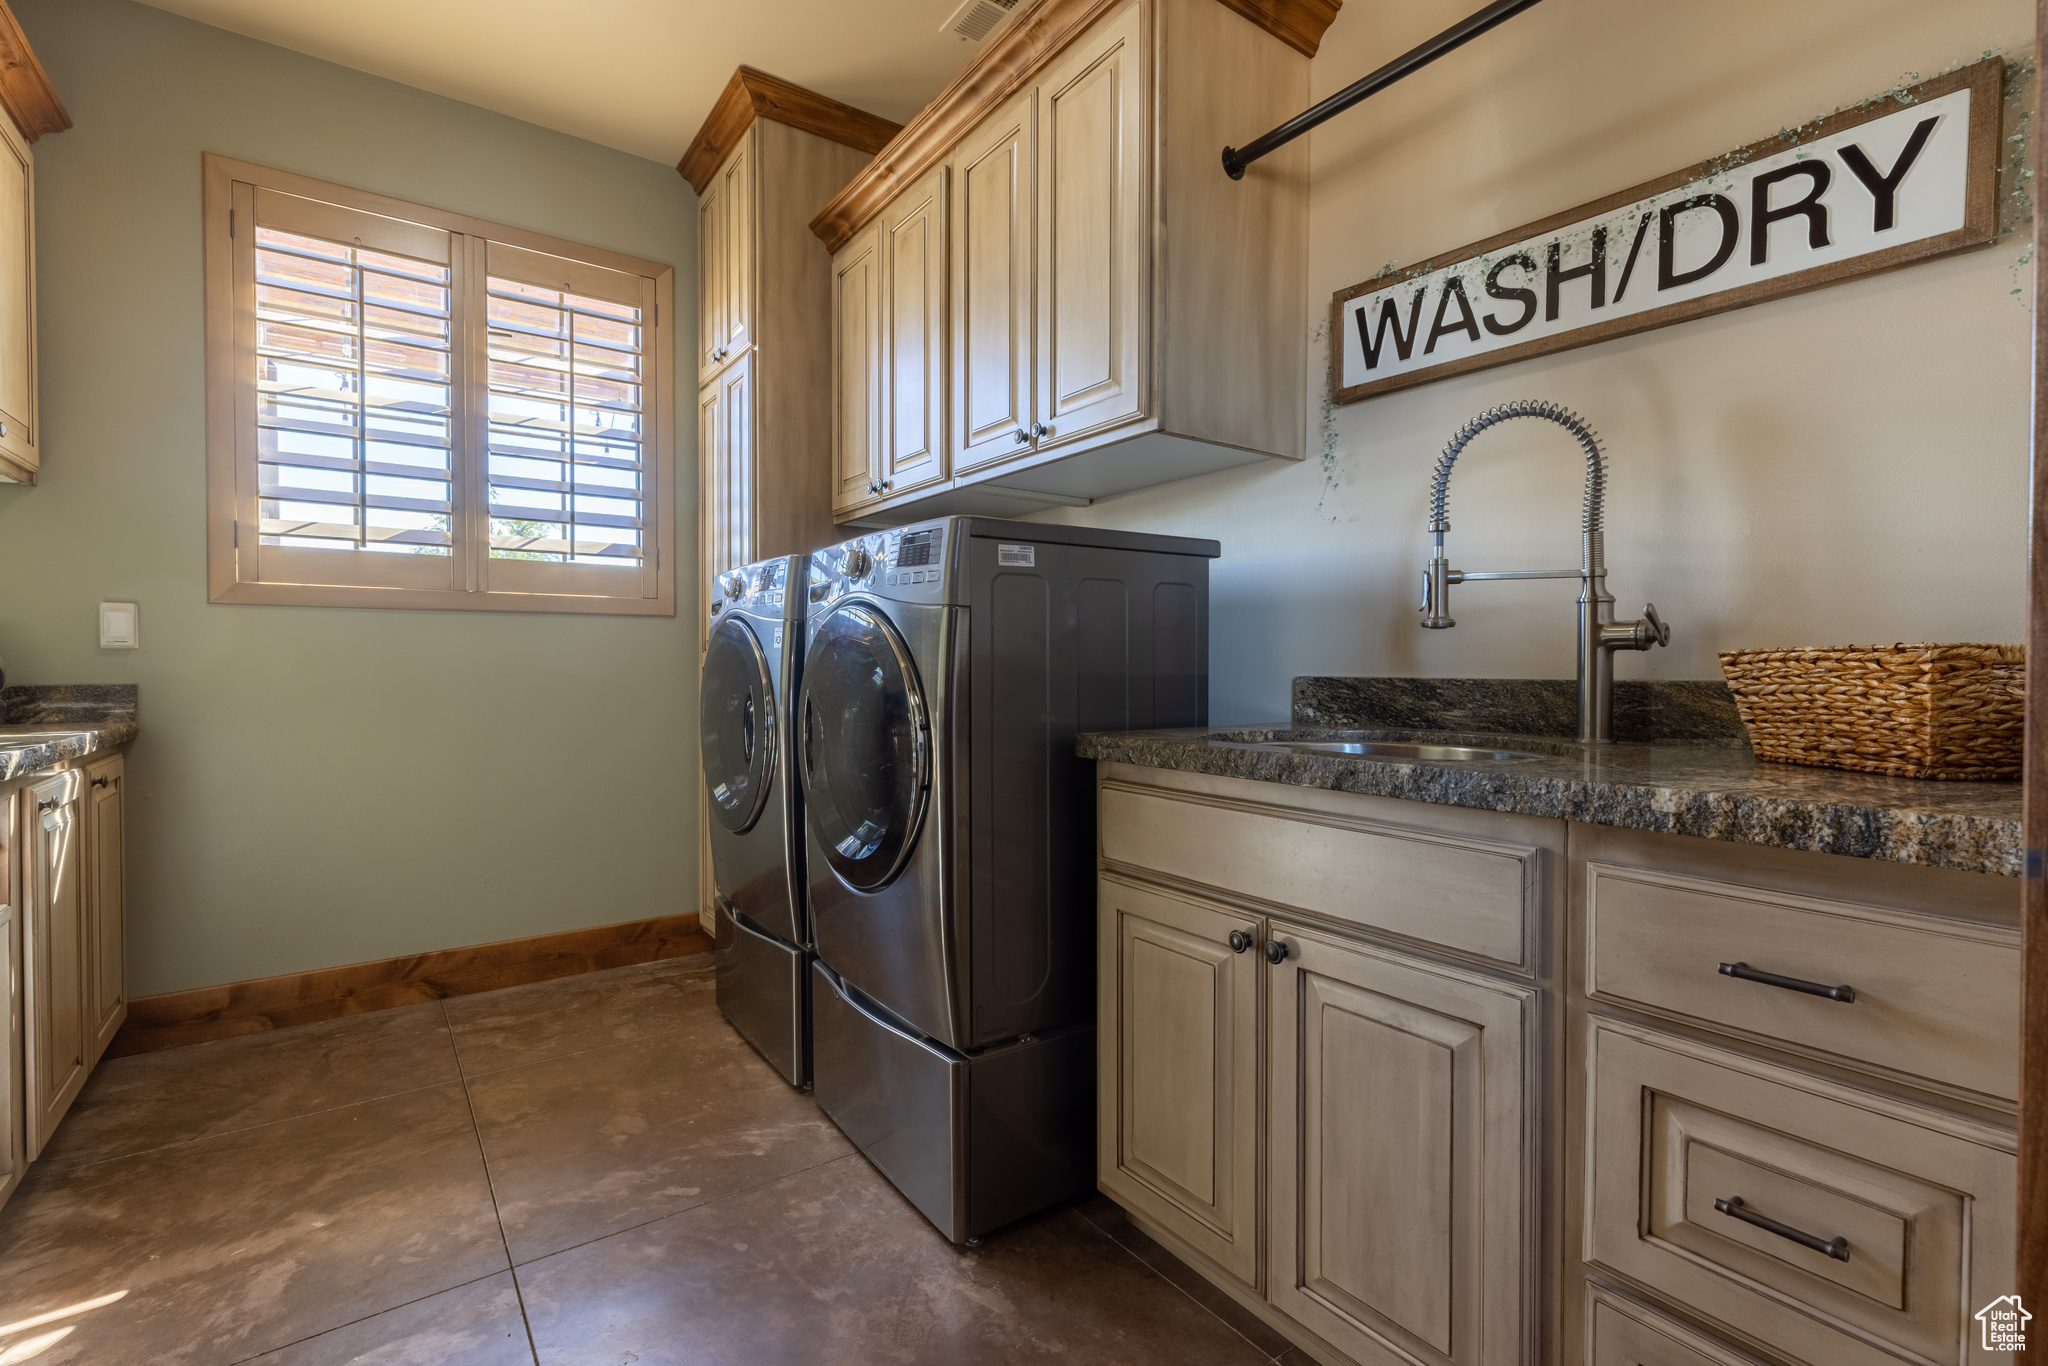 Washroom featuring cabinets, sink, dark tile flooring, and washer and dryer